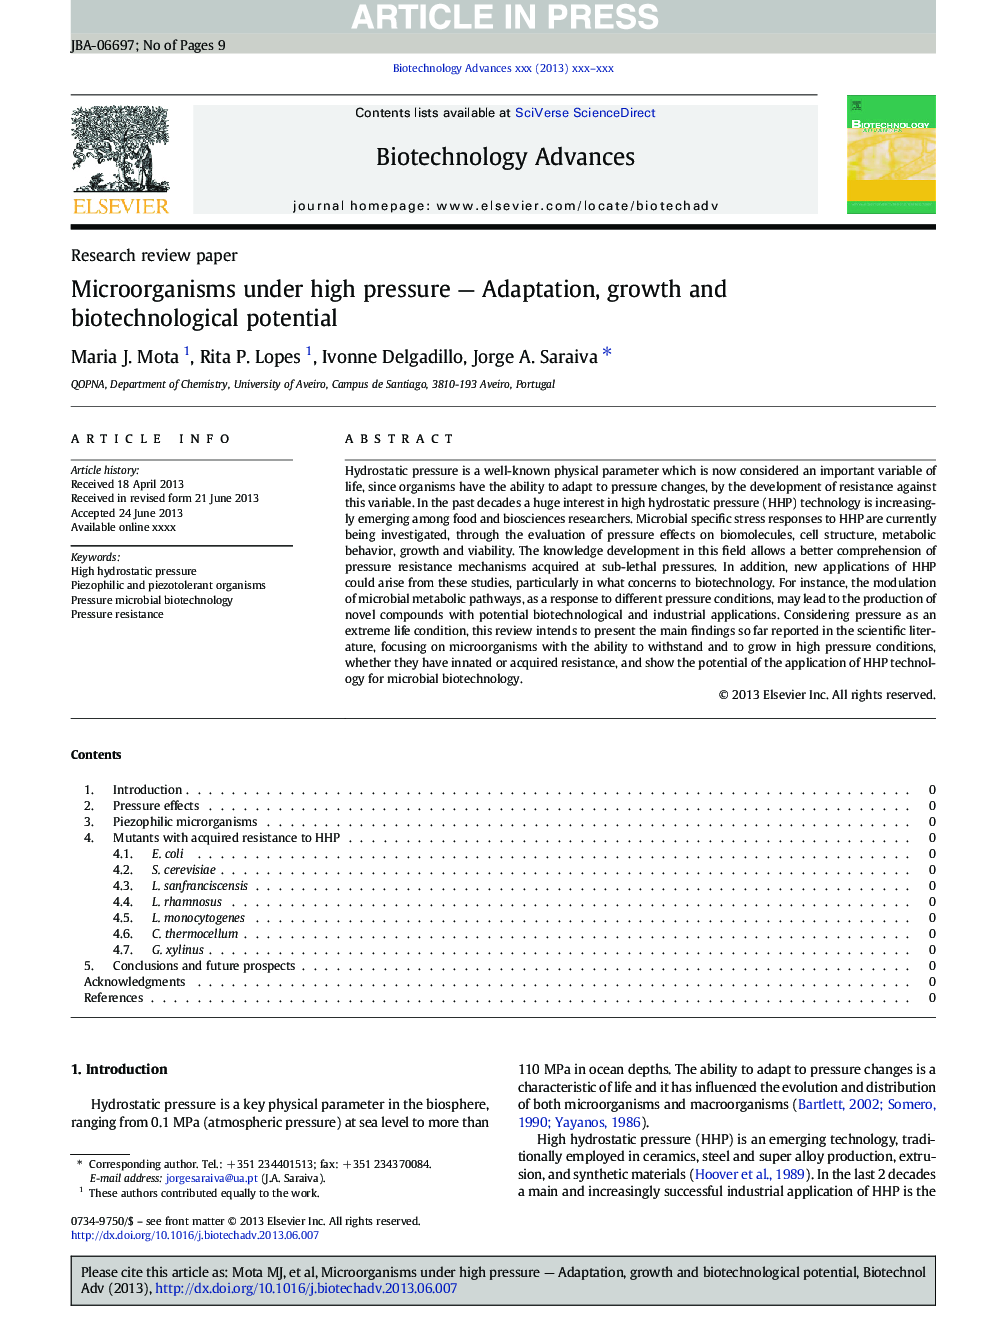 Microorganisms under high pressure - Adaptation, growth and biotechnological potential